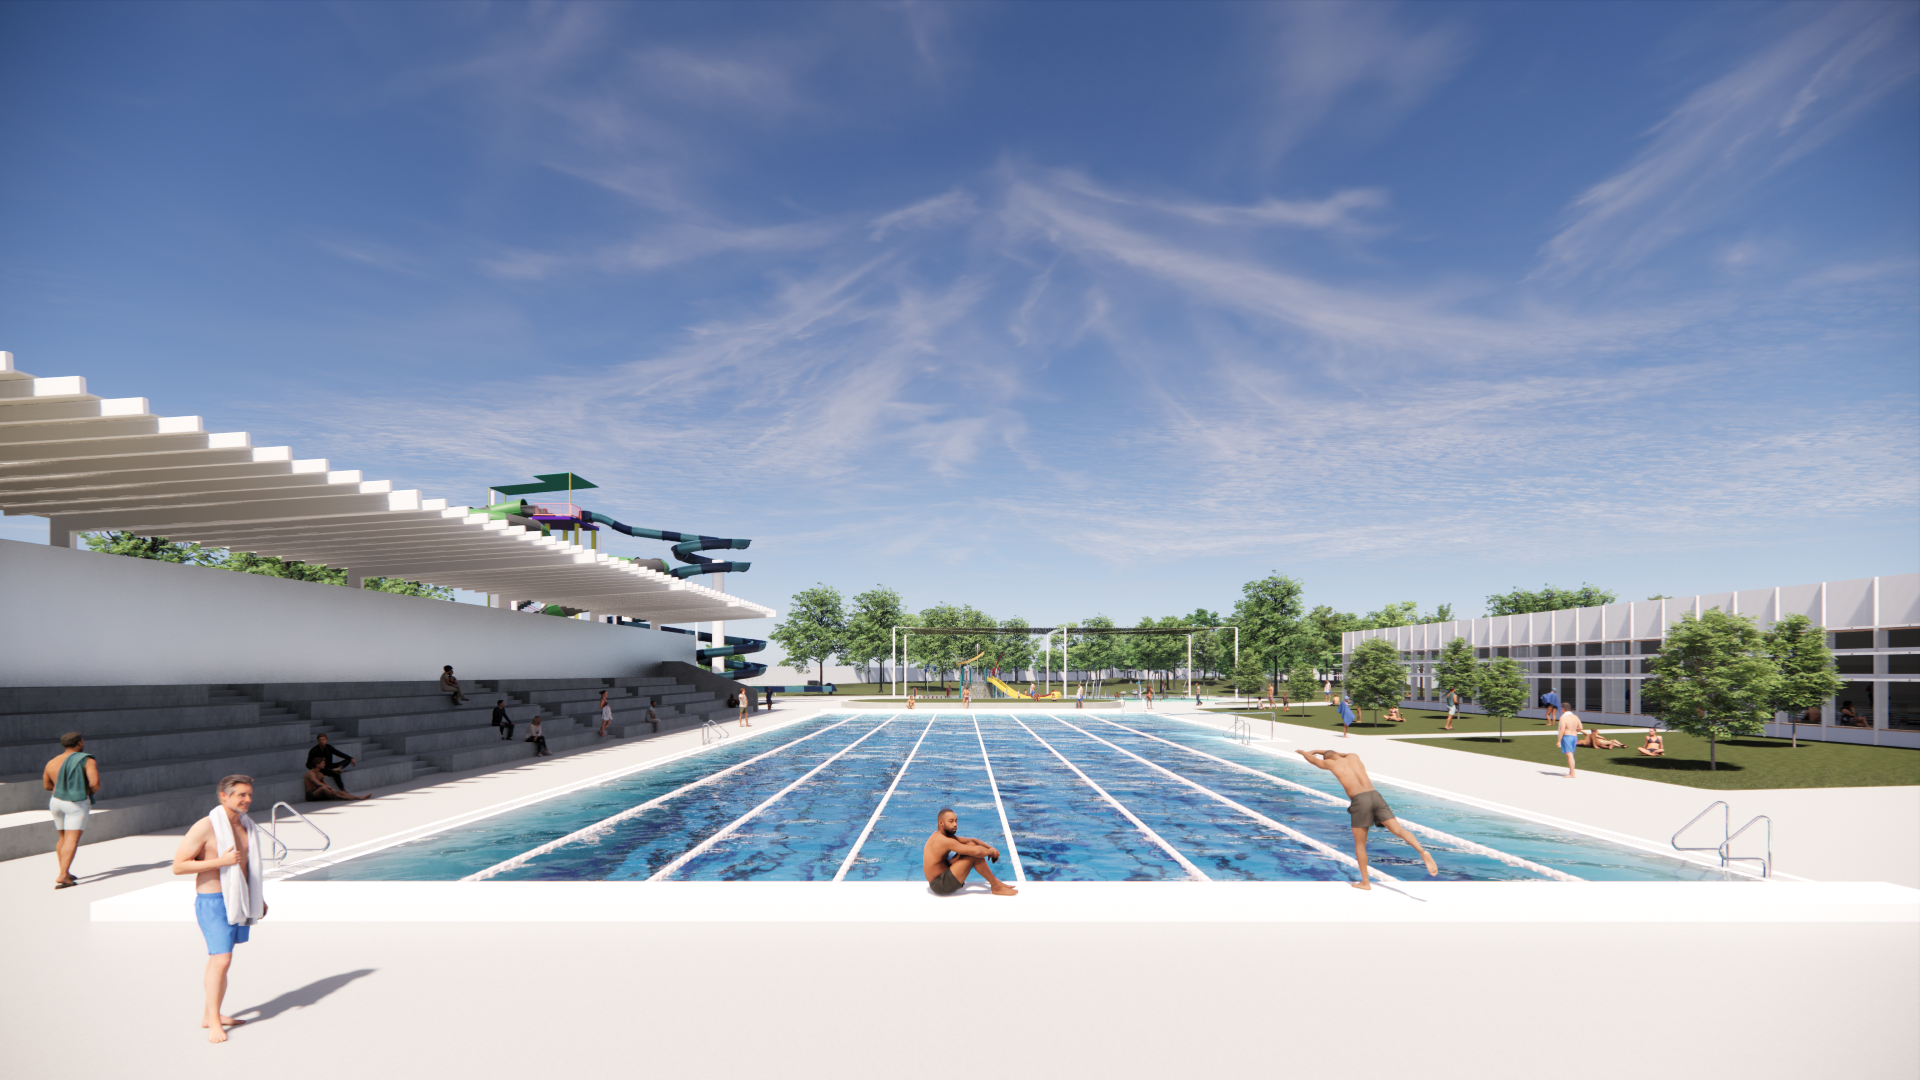 image showing a generated display plan for the new pool area